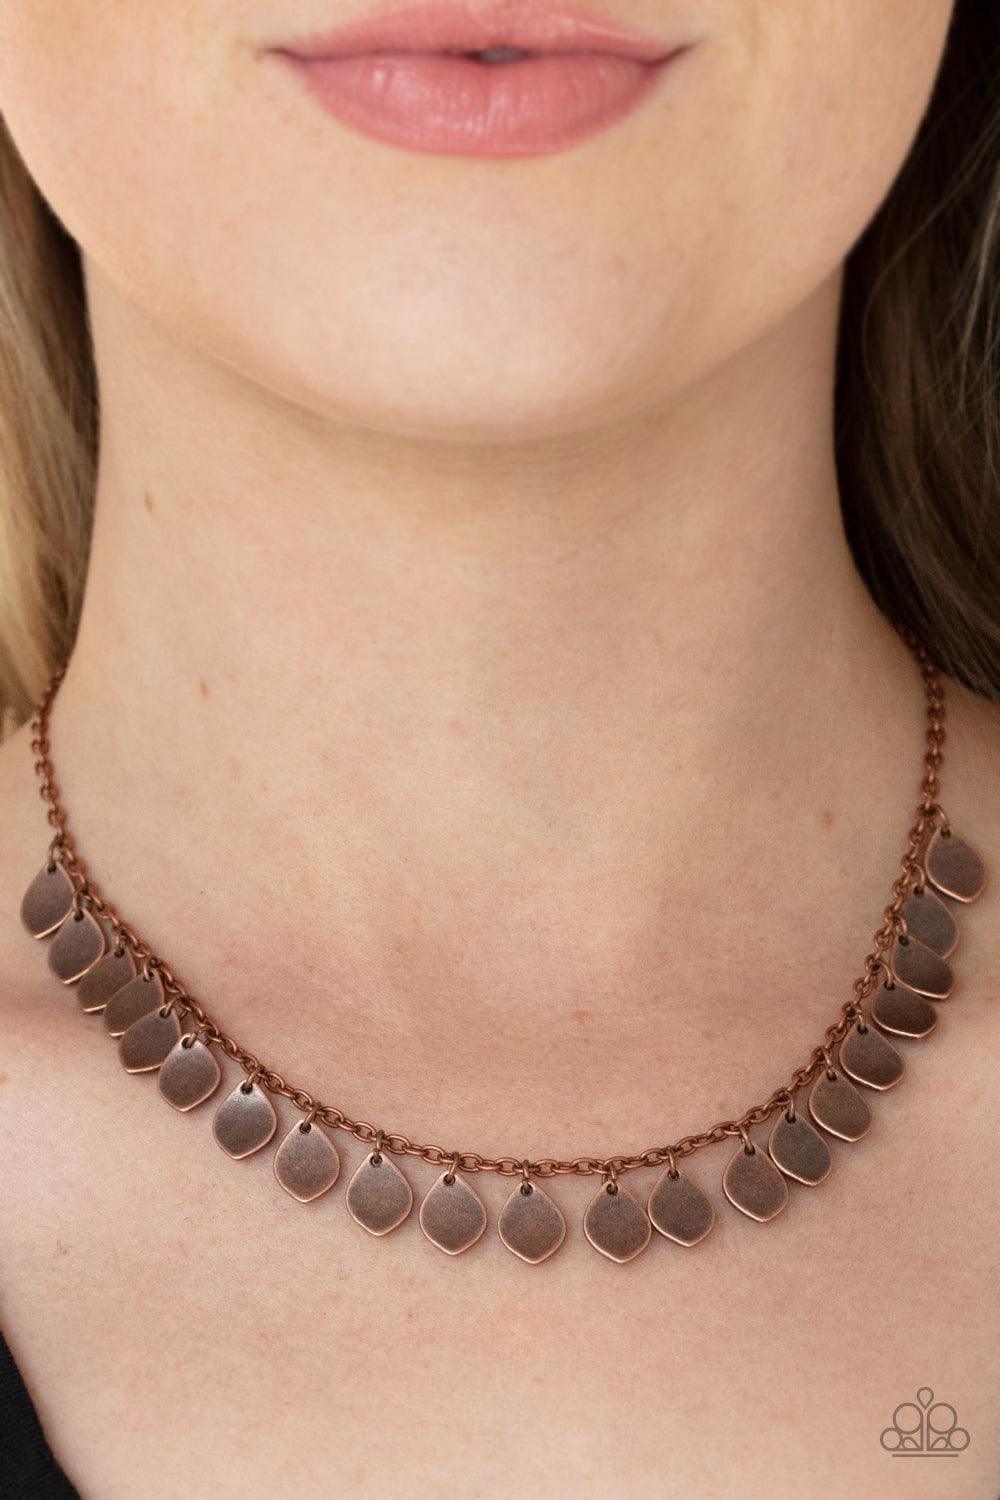 Paparazzi Accessories - Dainty Discovery - Copper Necklace - Bling by JessieK